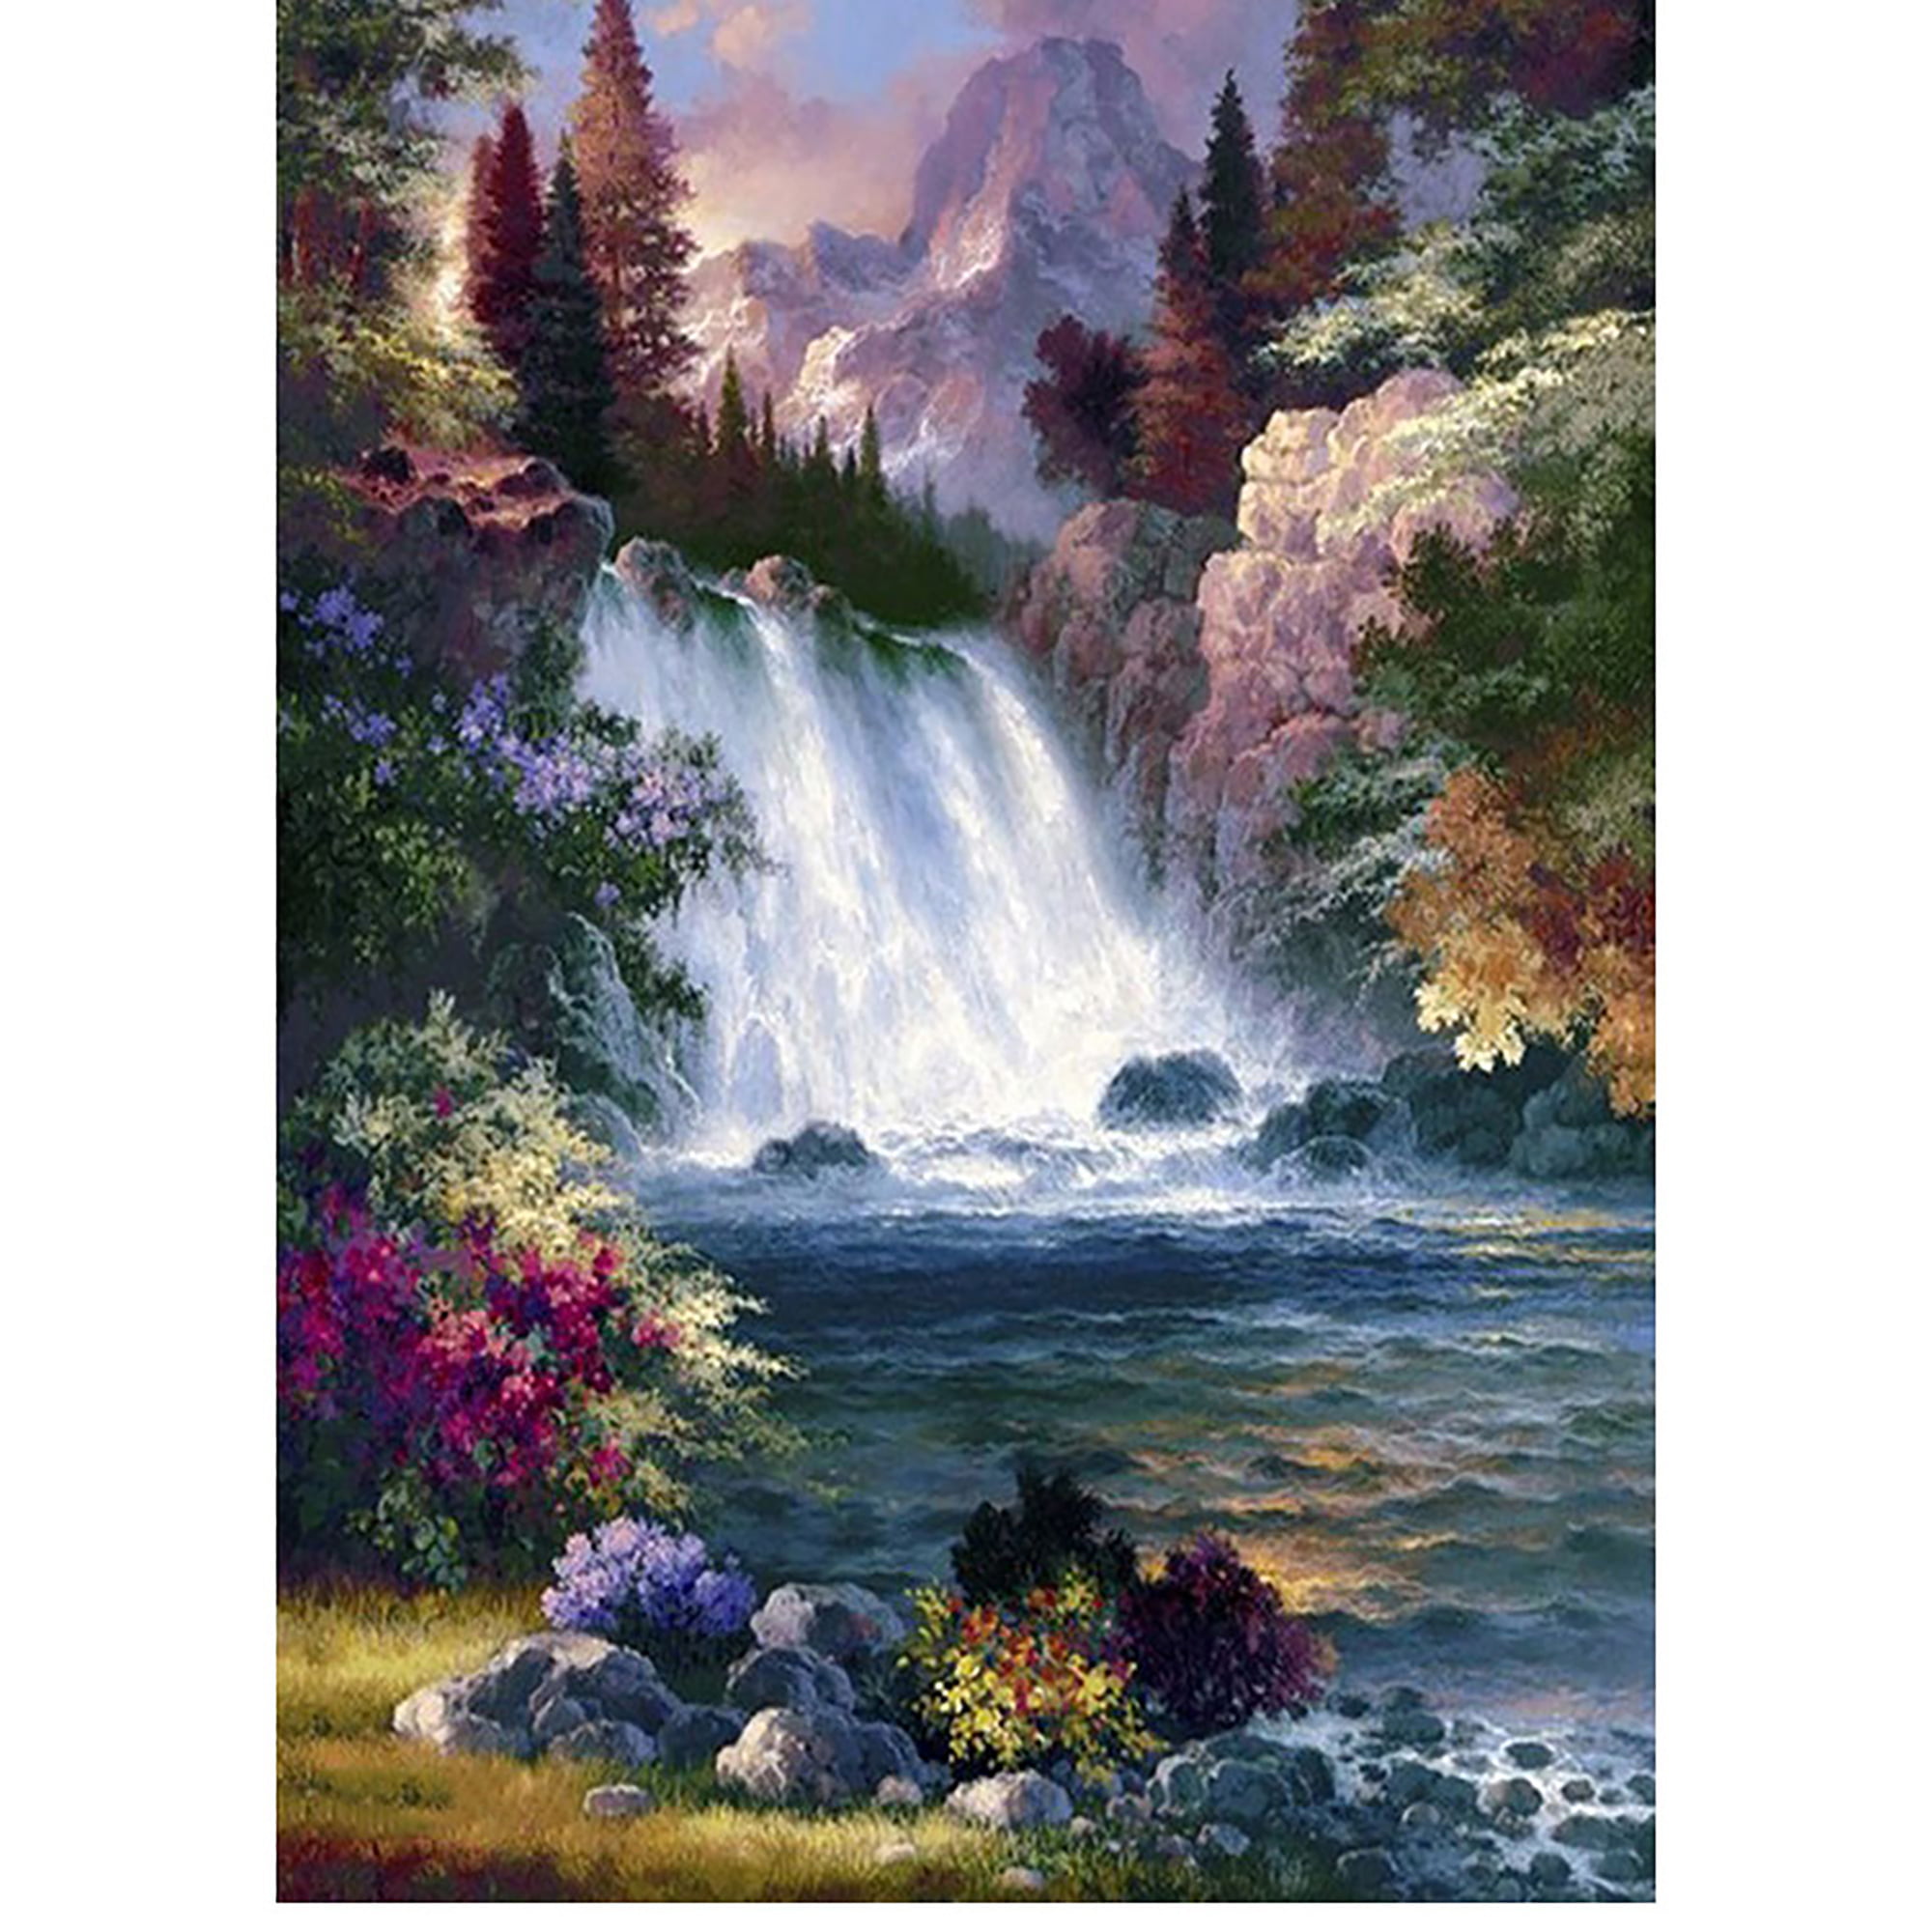 5D Full Drill Diamond Painting Waterfall Landscape Embroidery Cross Crafts DIY 